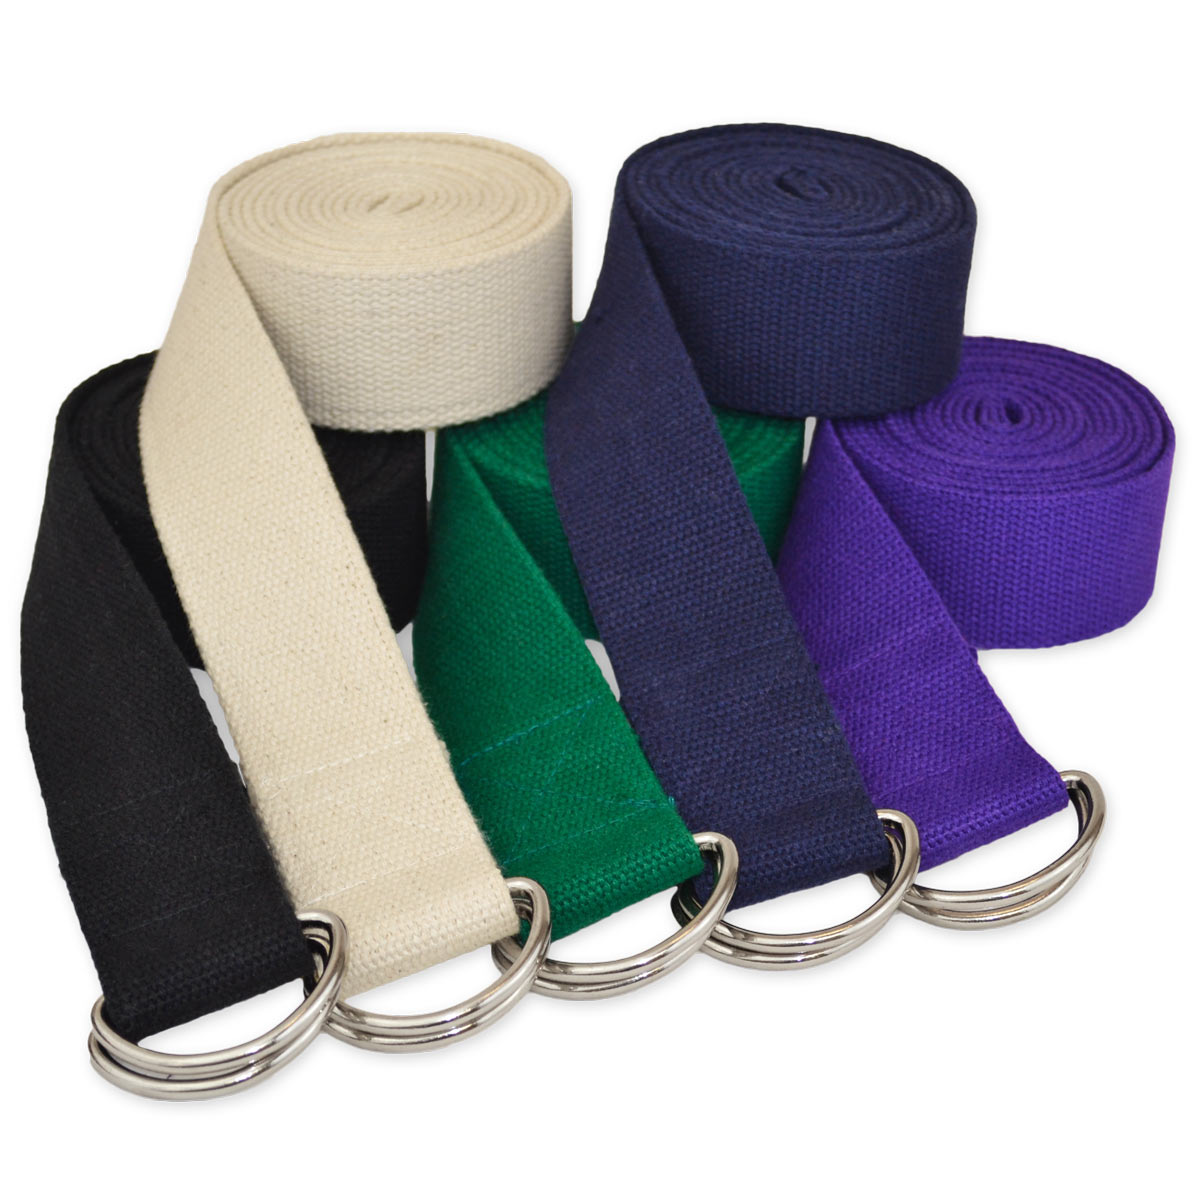 8' D-Ring Buckle Cotton Yoga Strap